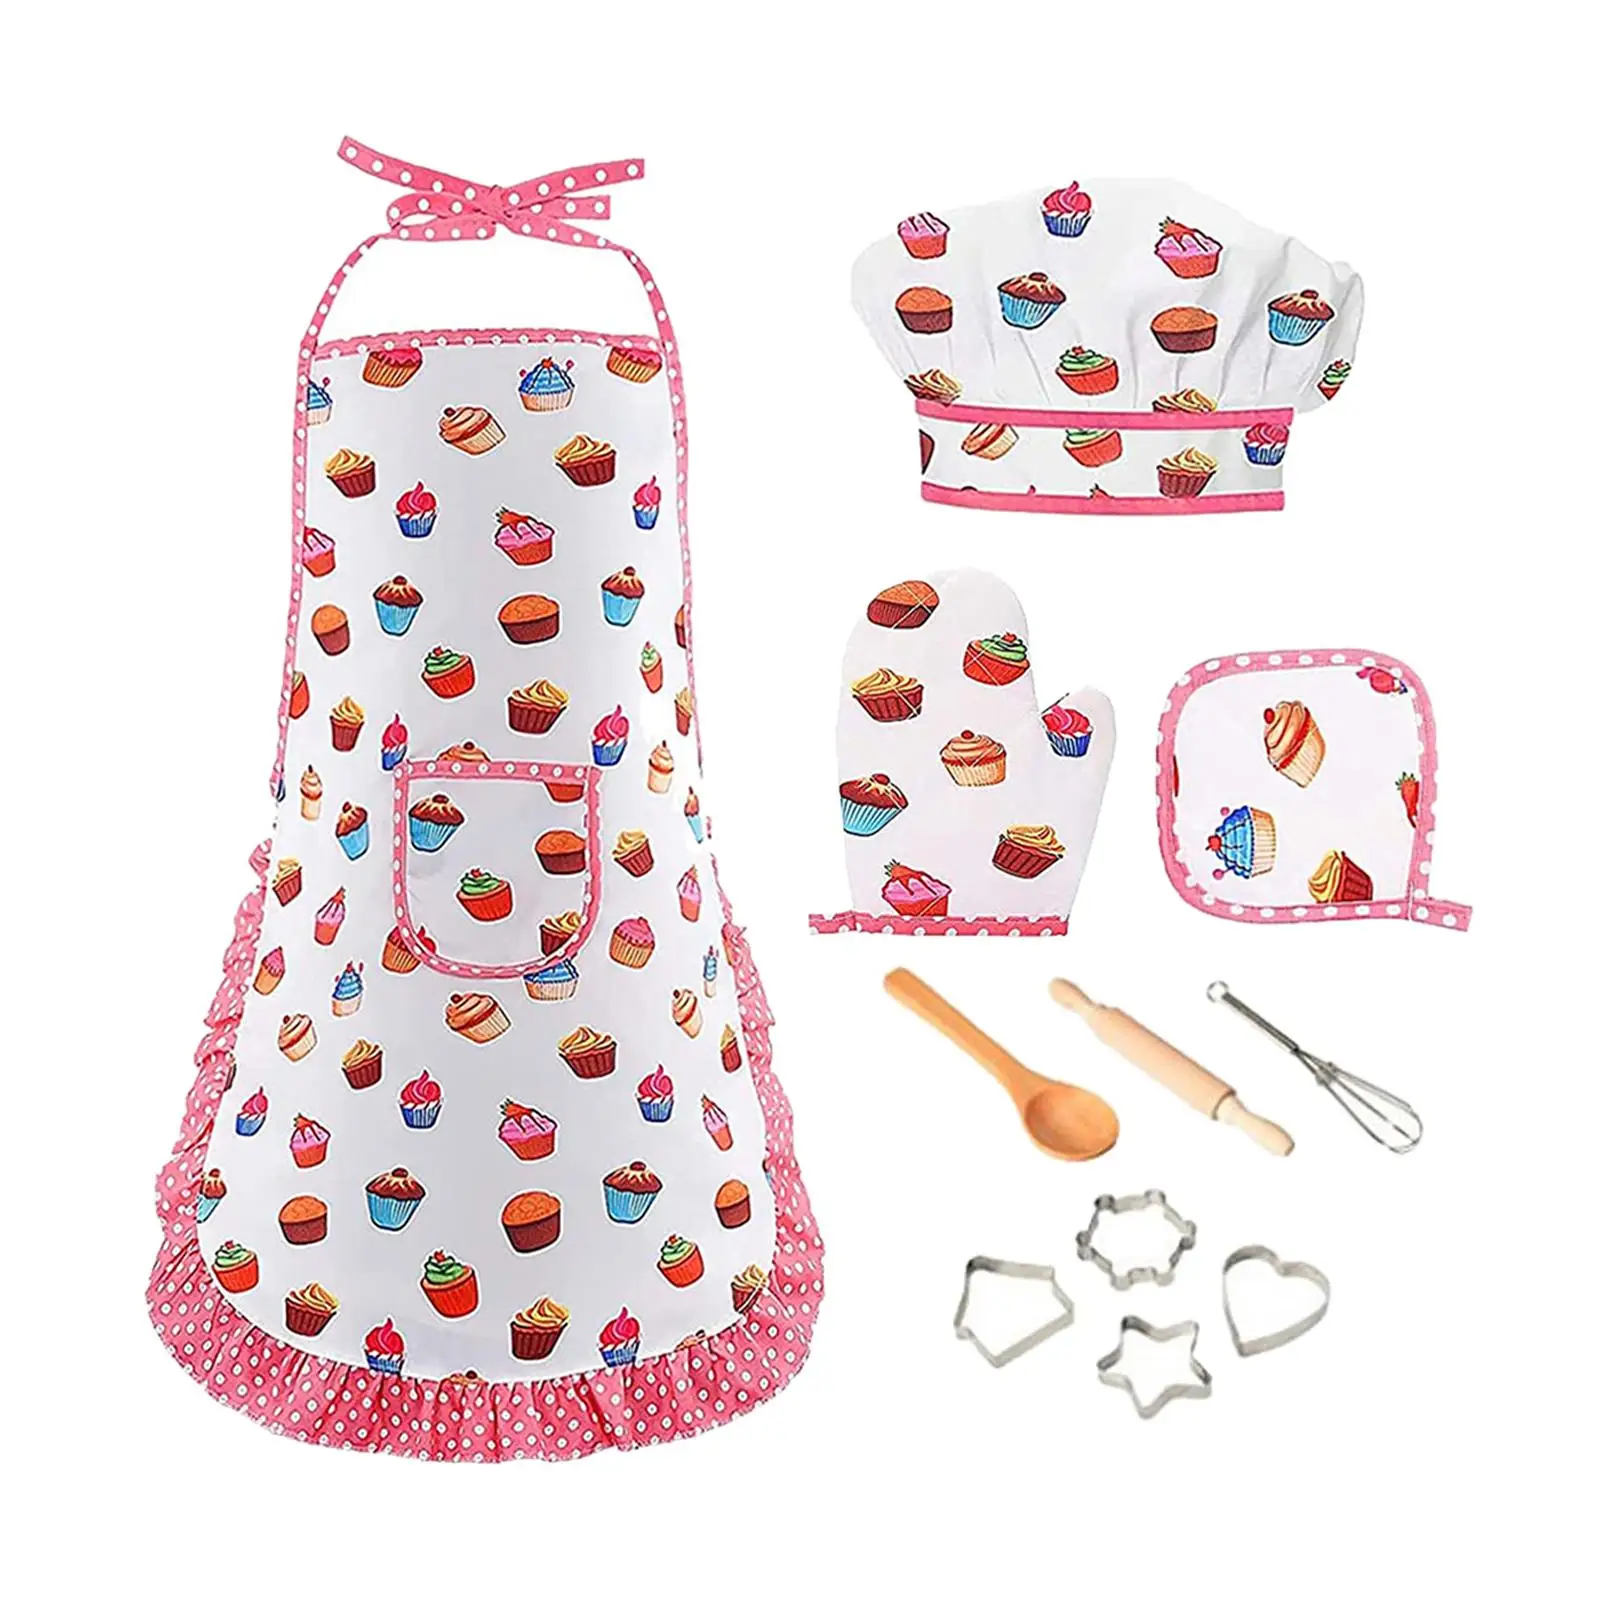 Chef Clothing Set Role Play Toy Developmental Toy Kitchen Costume Set for Kids Gift